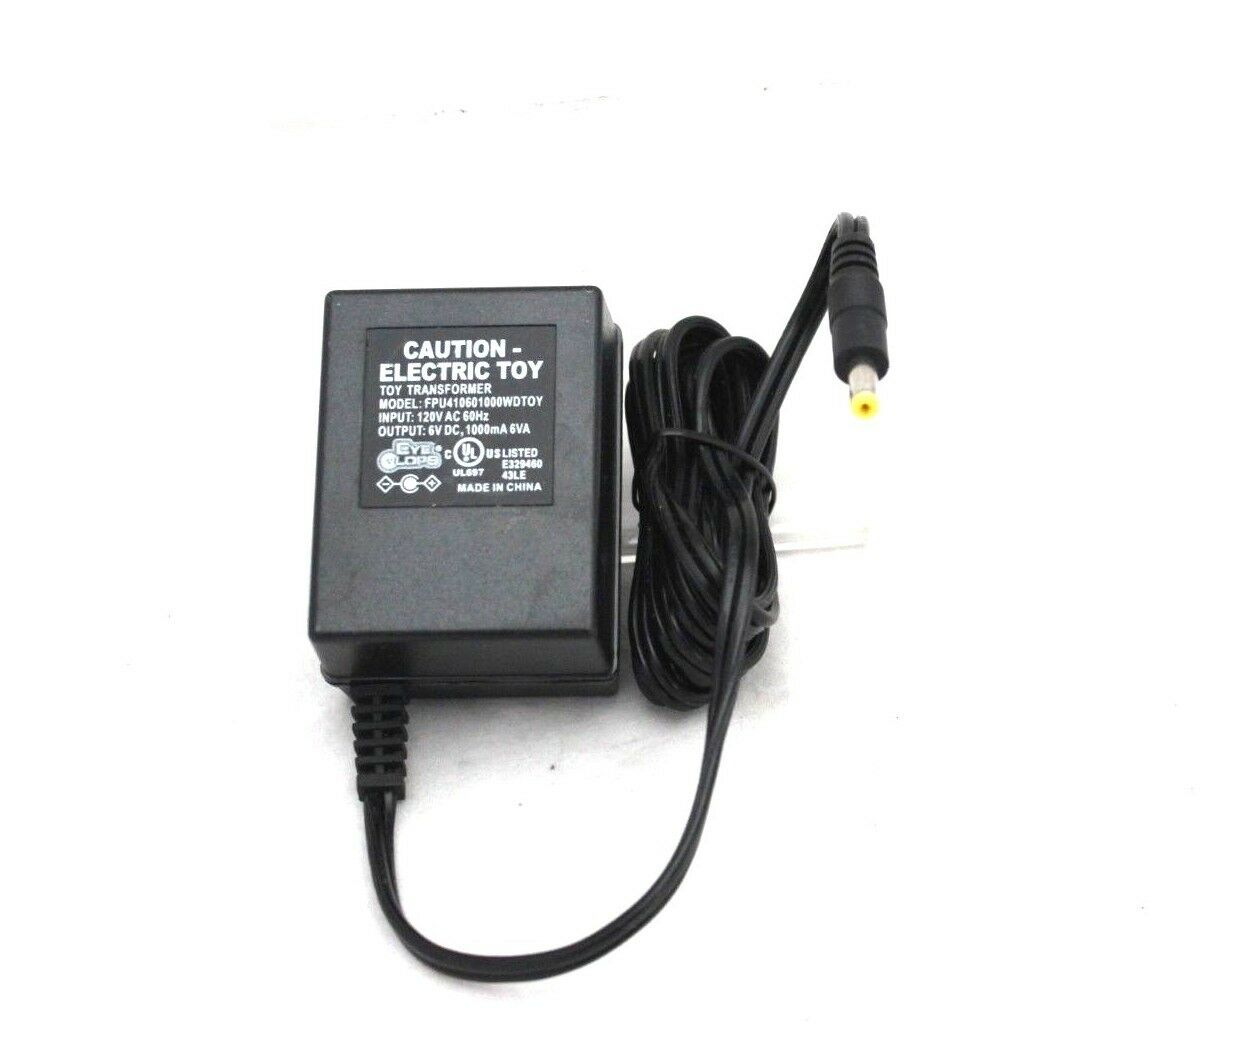 ELECTRIC TOY Transformer Adapter Charger FPU414060100WDTOY 6VDC 100mA 6VA Brand: ELECTRIC TOY Compatible Product Line